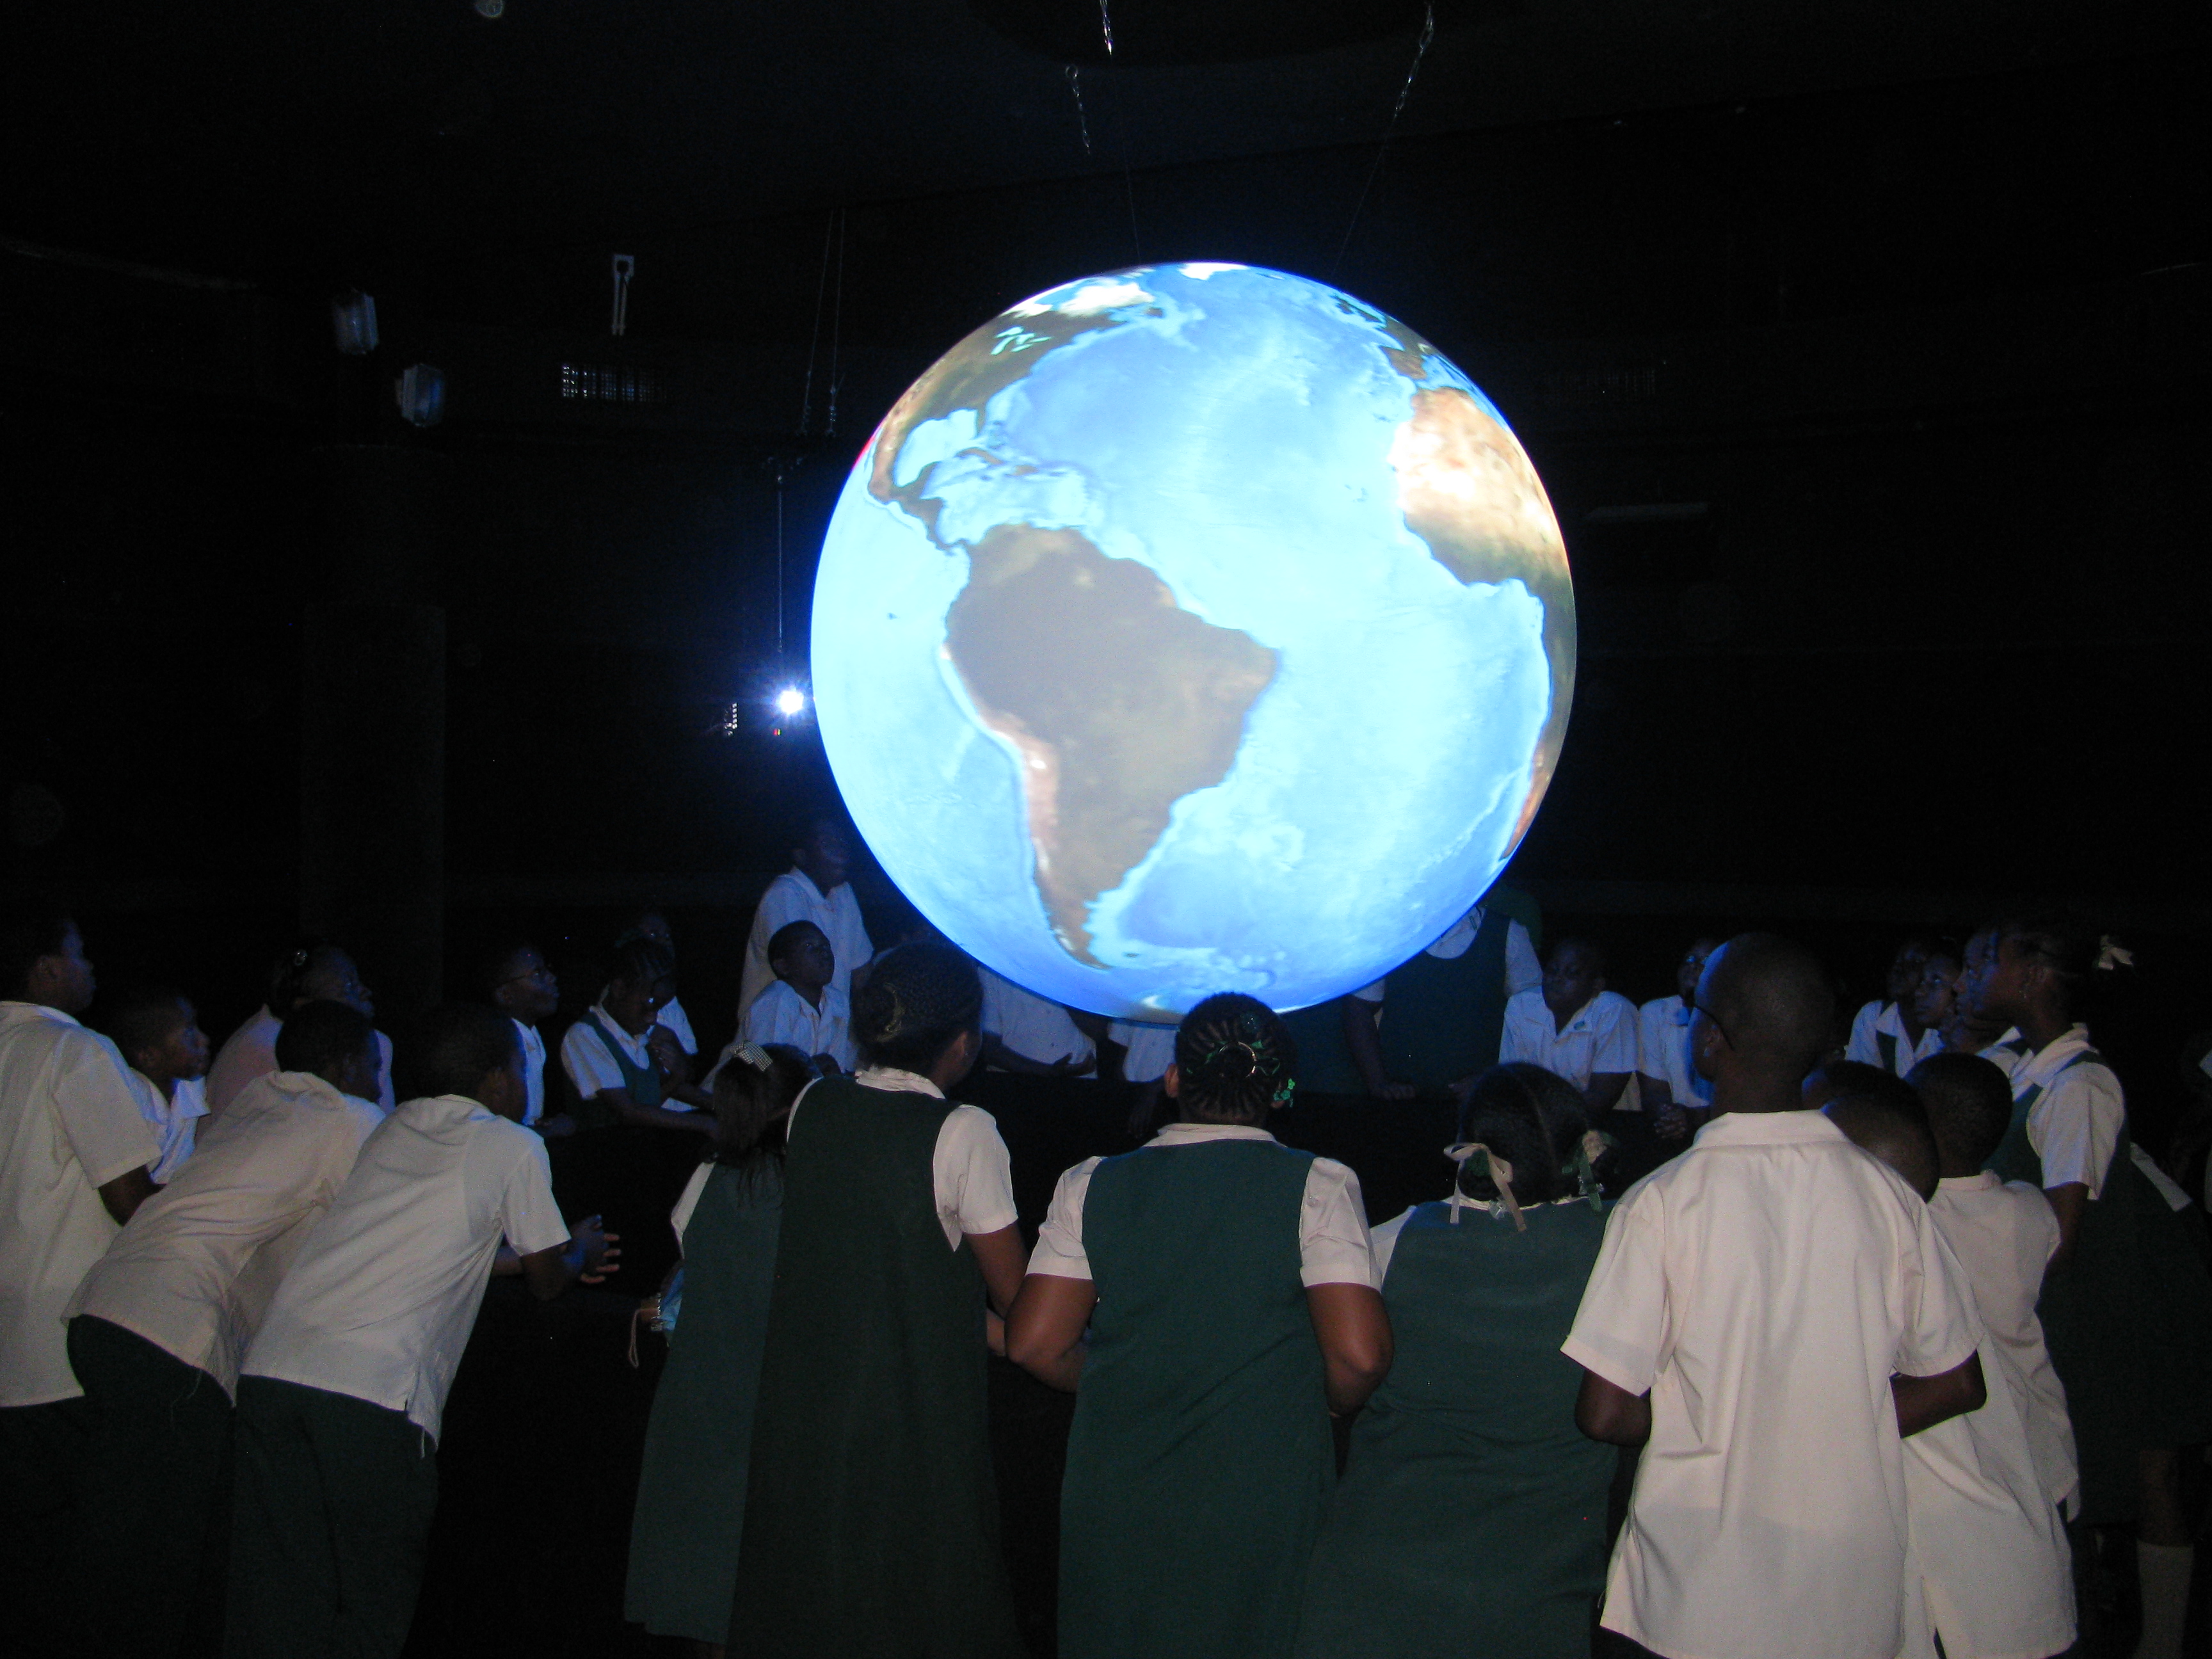 A group of students in uniforms stand in a circle around Science On a Sphere in a darkened room